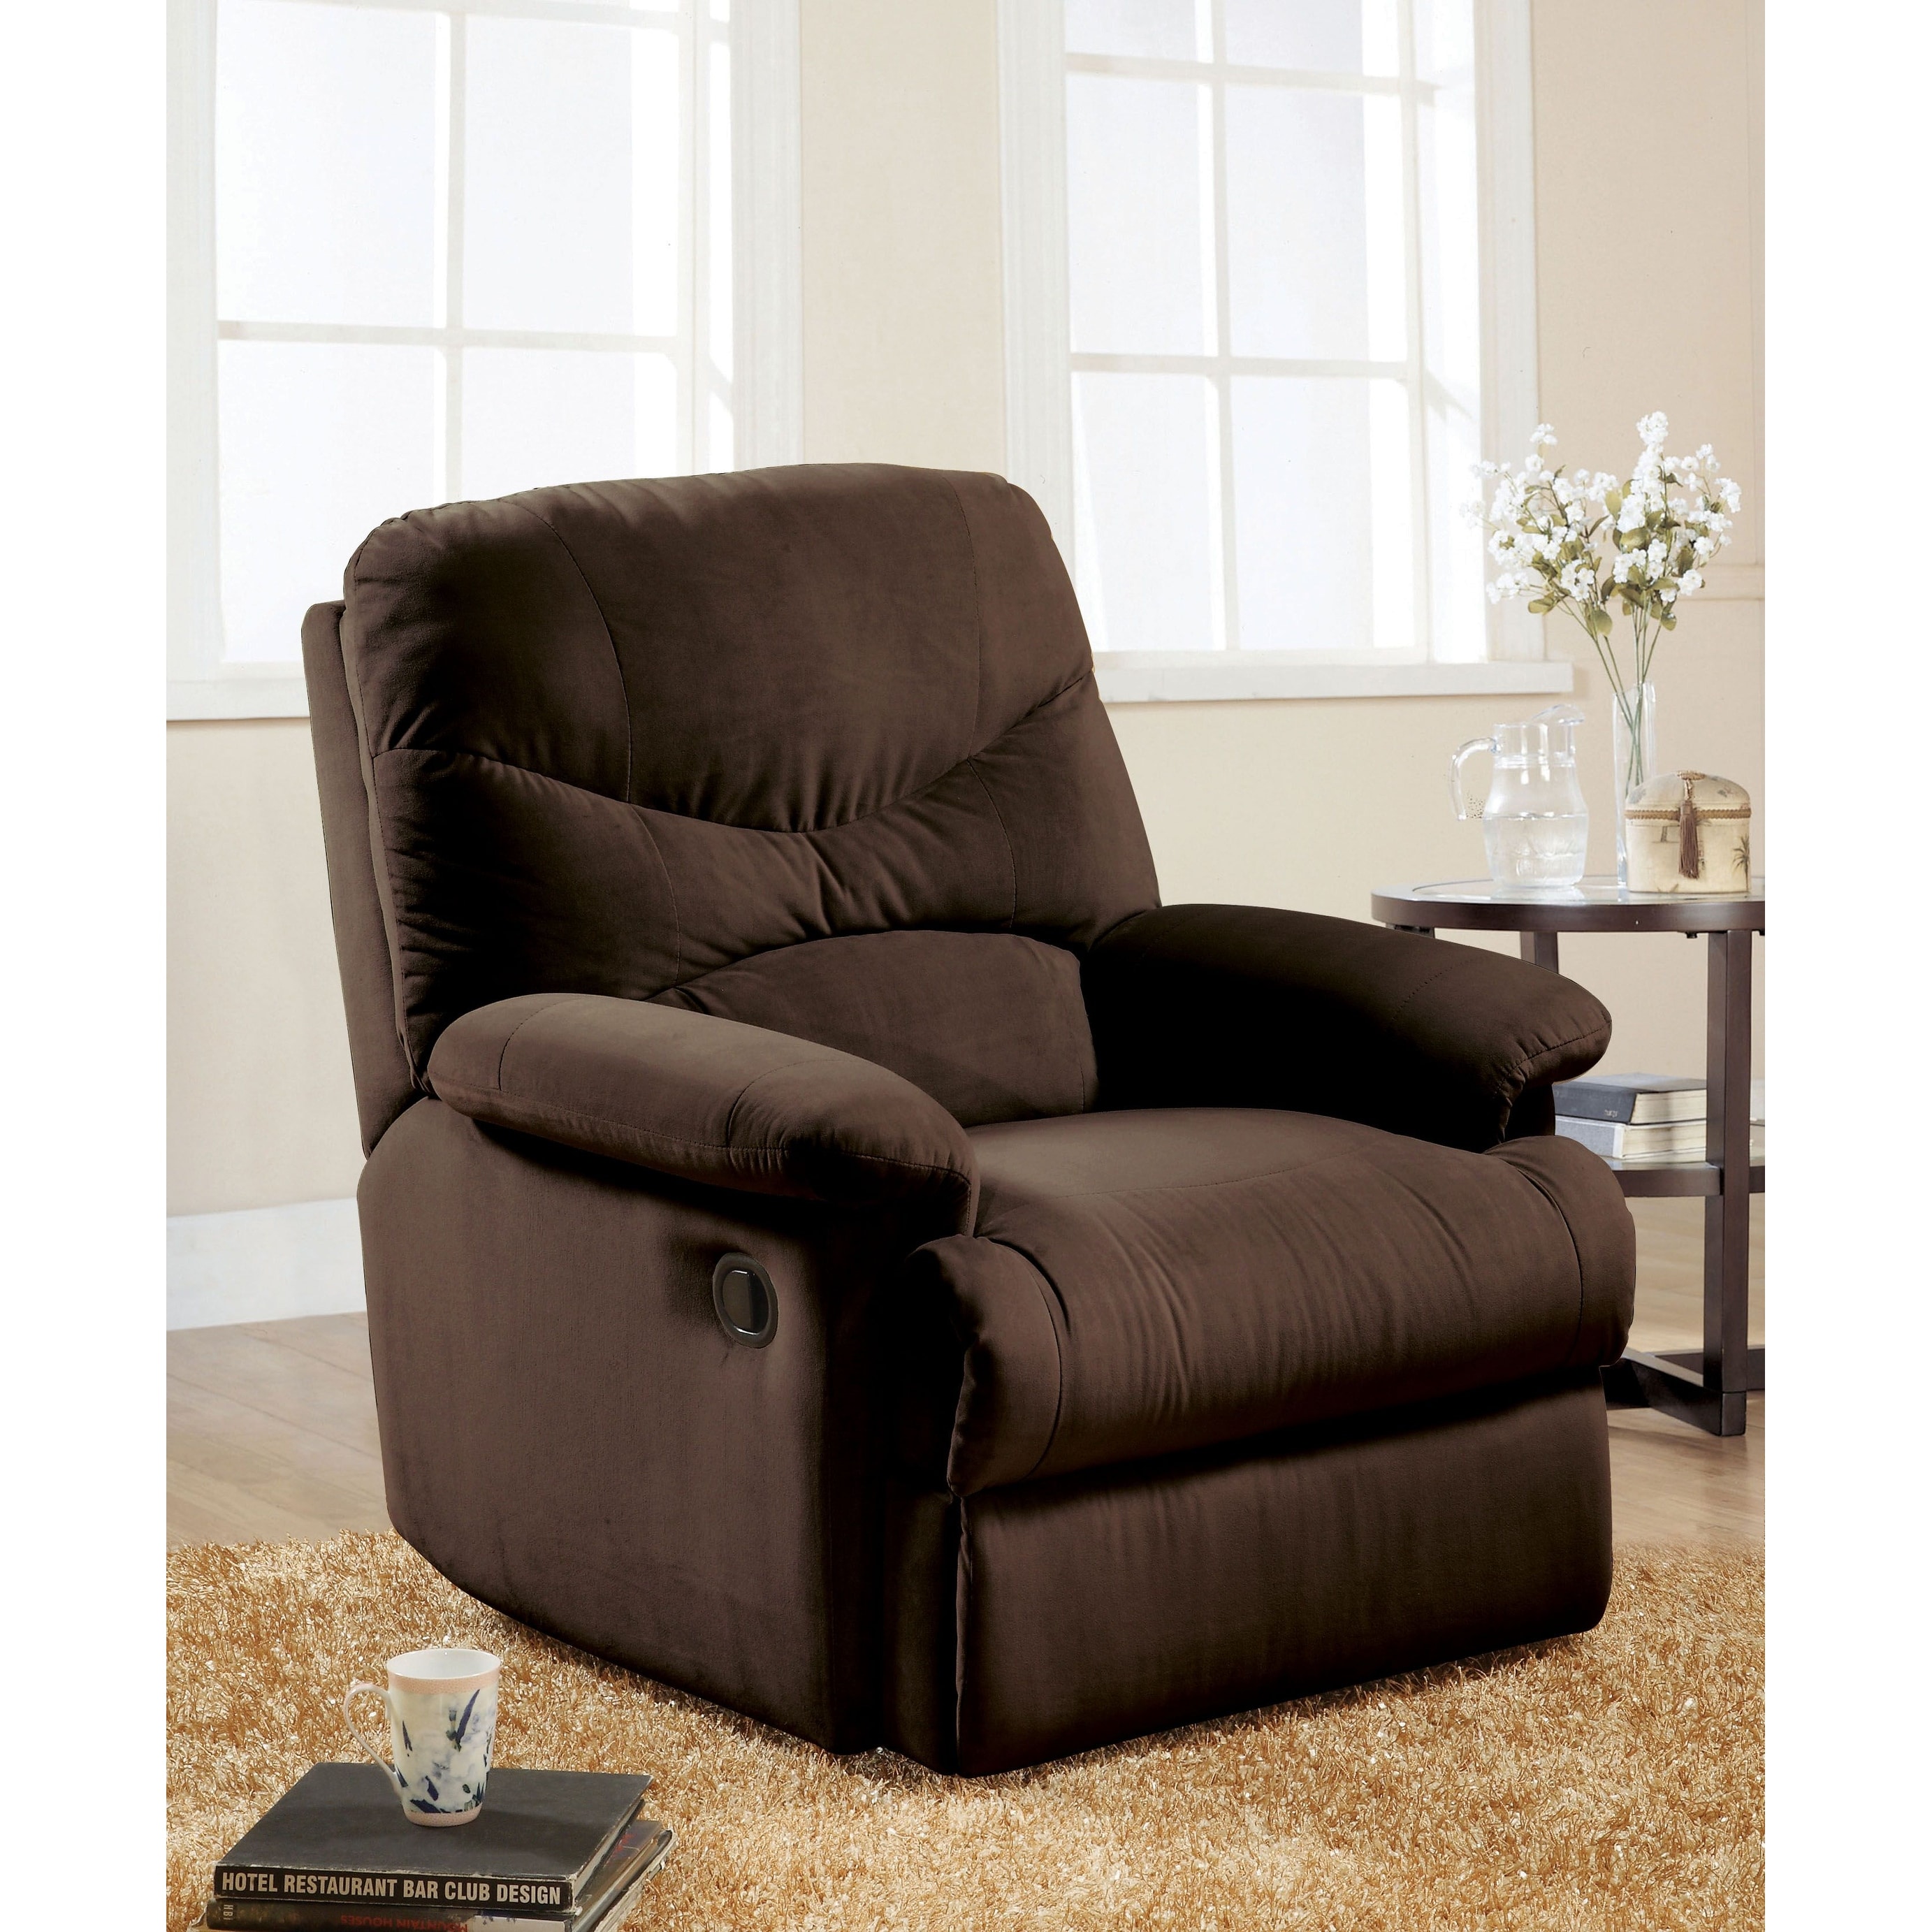 Adjustable Recliner Chair with Hardwood Frame & Footrest Extension,  Cushioned Single Sofa for Livingroom